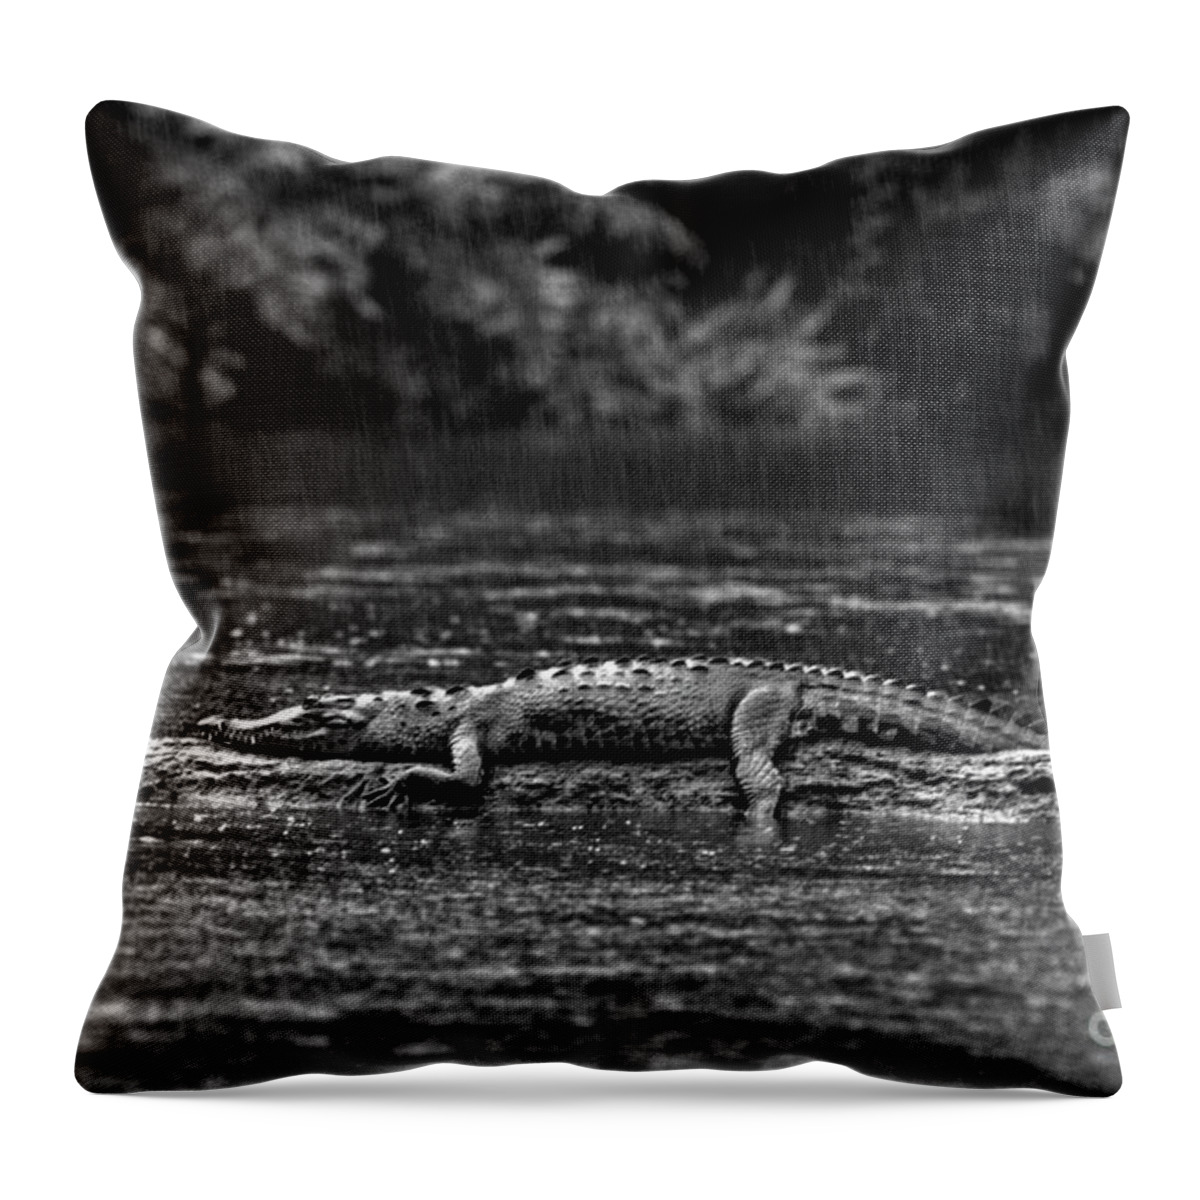 Black And White Throw Pillow featuring the photograph Costa_rica_25-17 by Craig Lovell